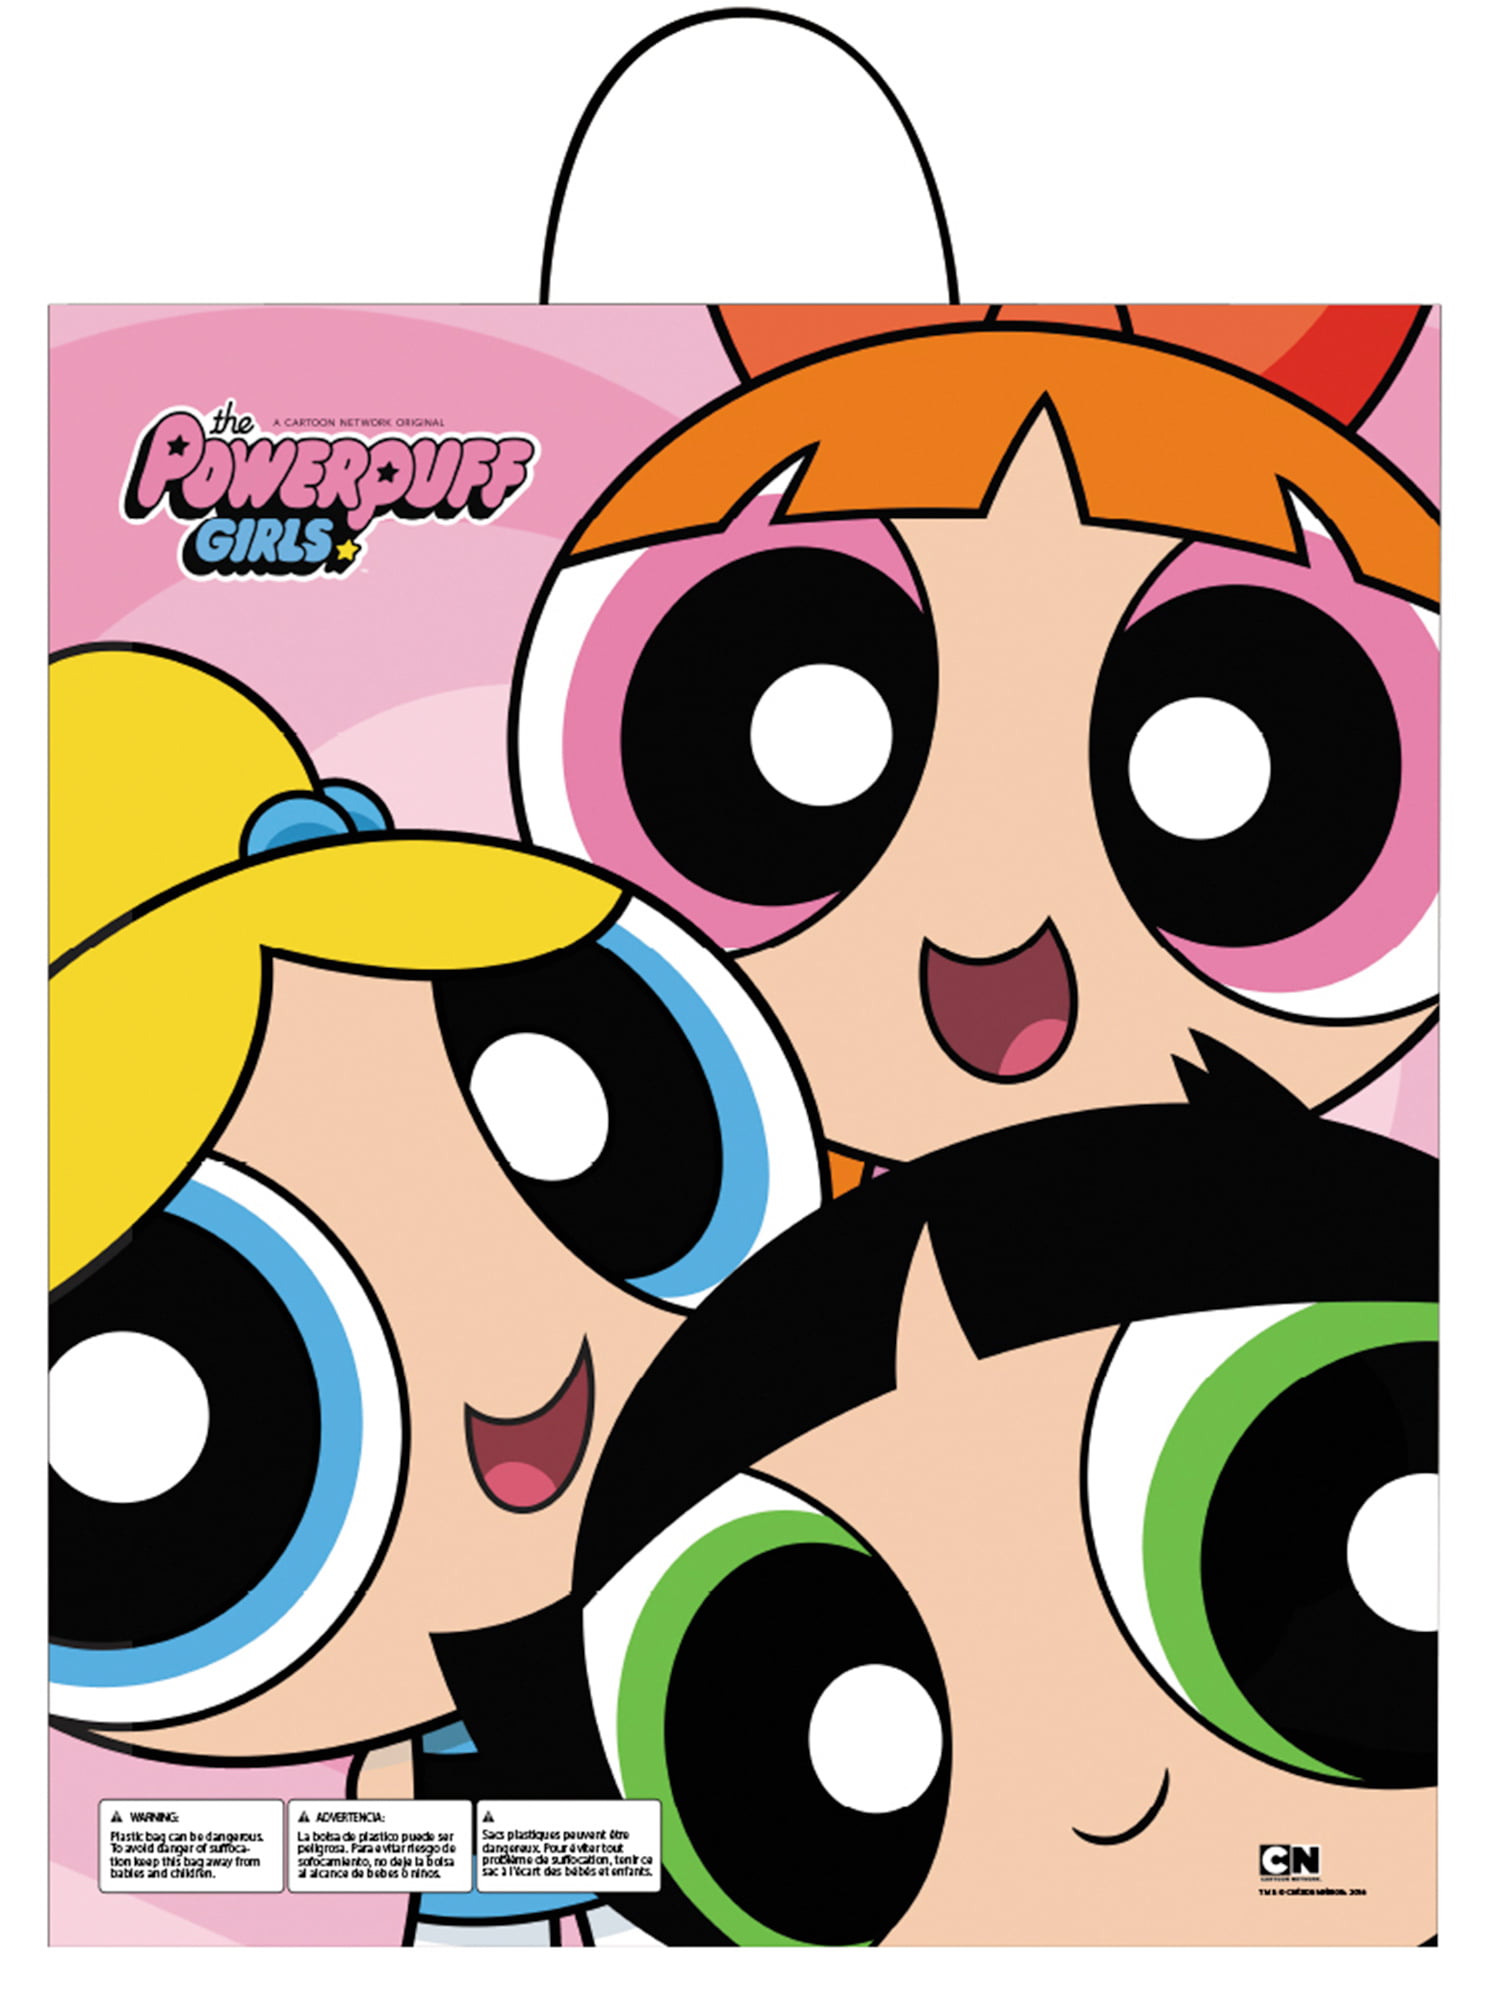 Powerpuff Girls "Blossom Bubbles and Buttercup" 16 in x 16 in Tote Bag New 